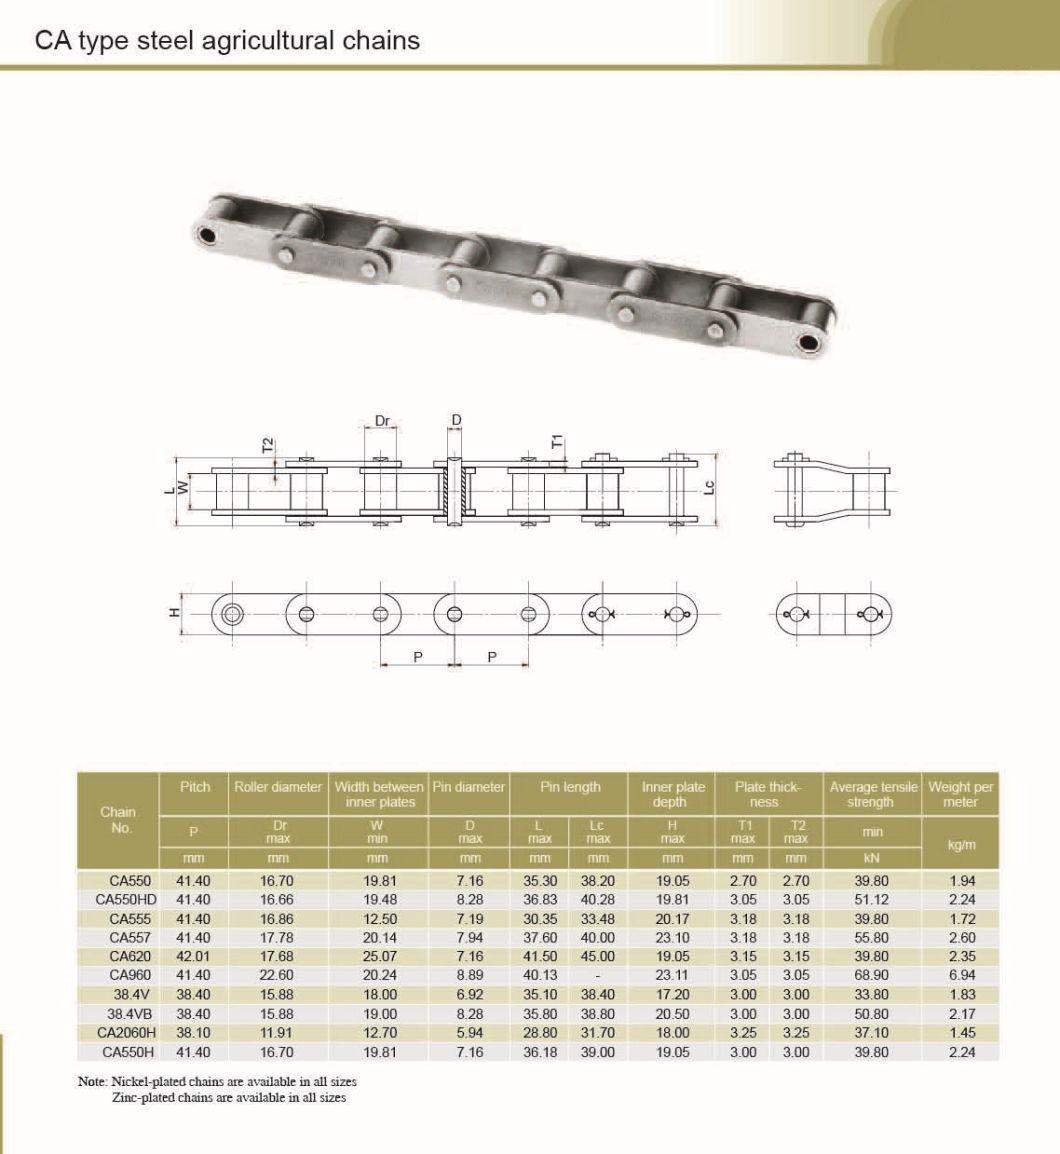 Ca557-A29 Agricultural Machinery Roller Chain with Ca557f2, Ca557f1, Ca557f4, Ca557f3, Ca5507f7